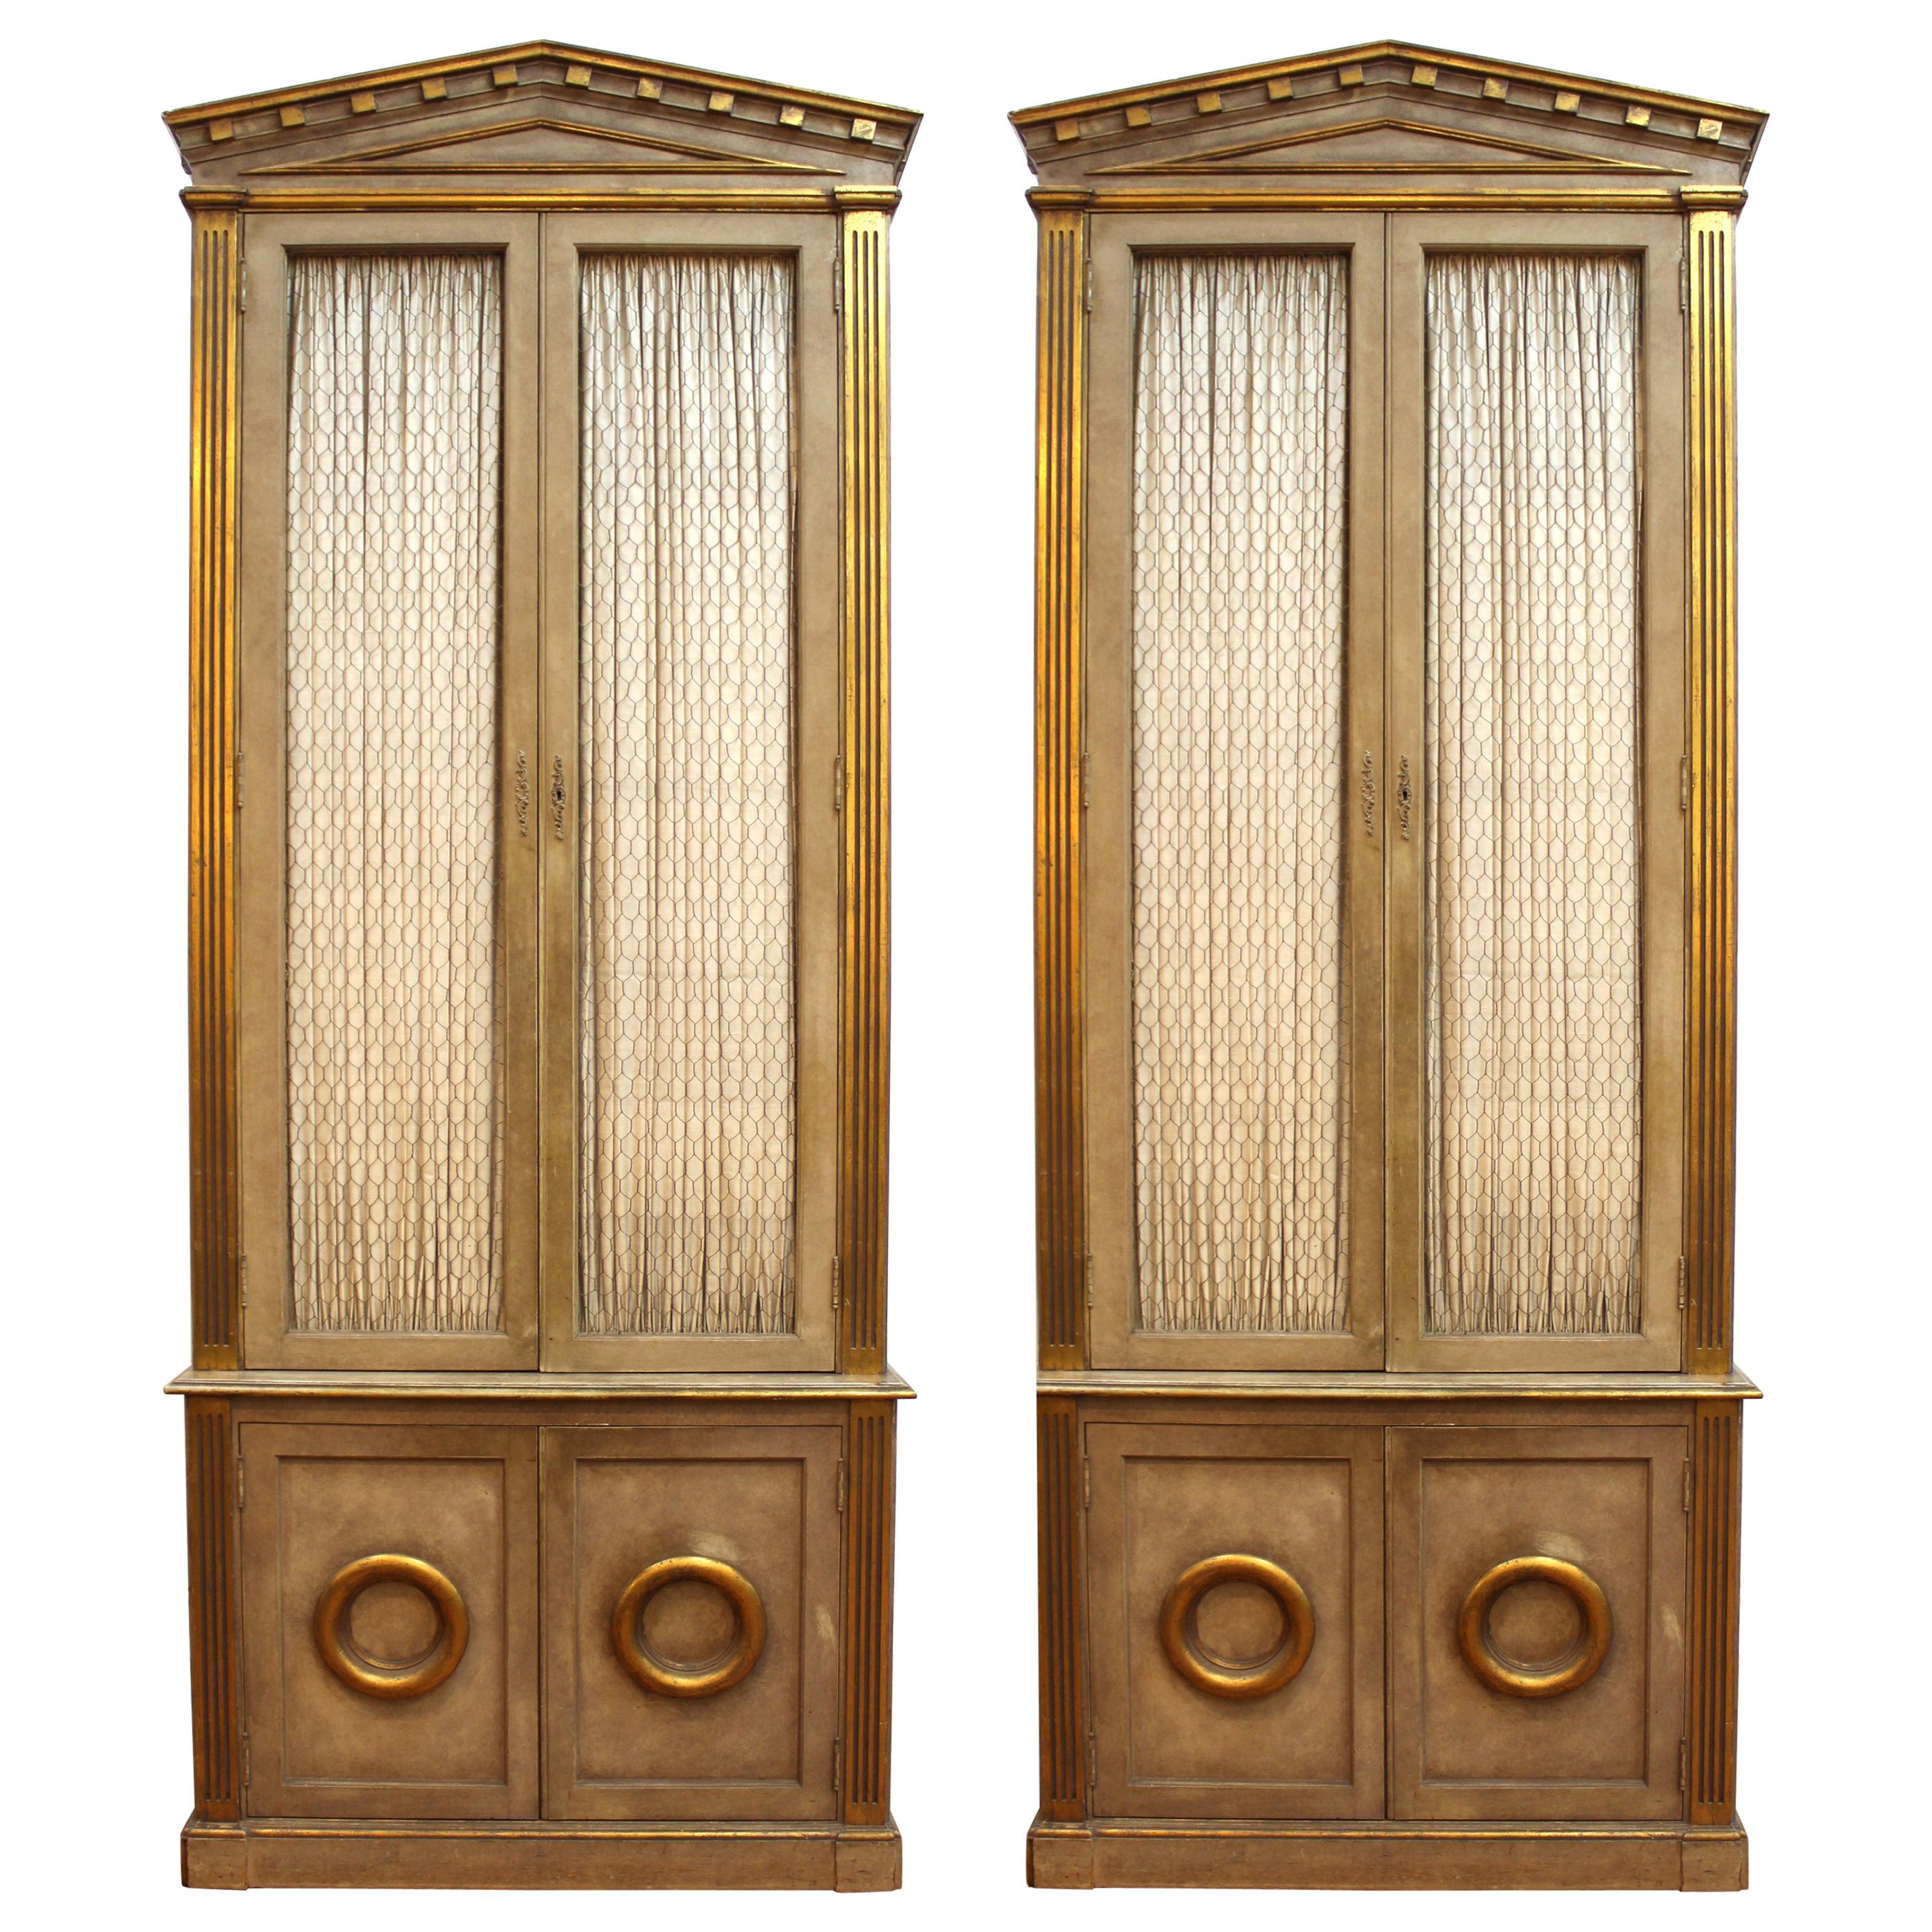 Monumental Neoclassical Revival Style Pedimented Wood Cabinets